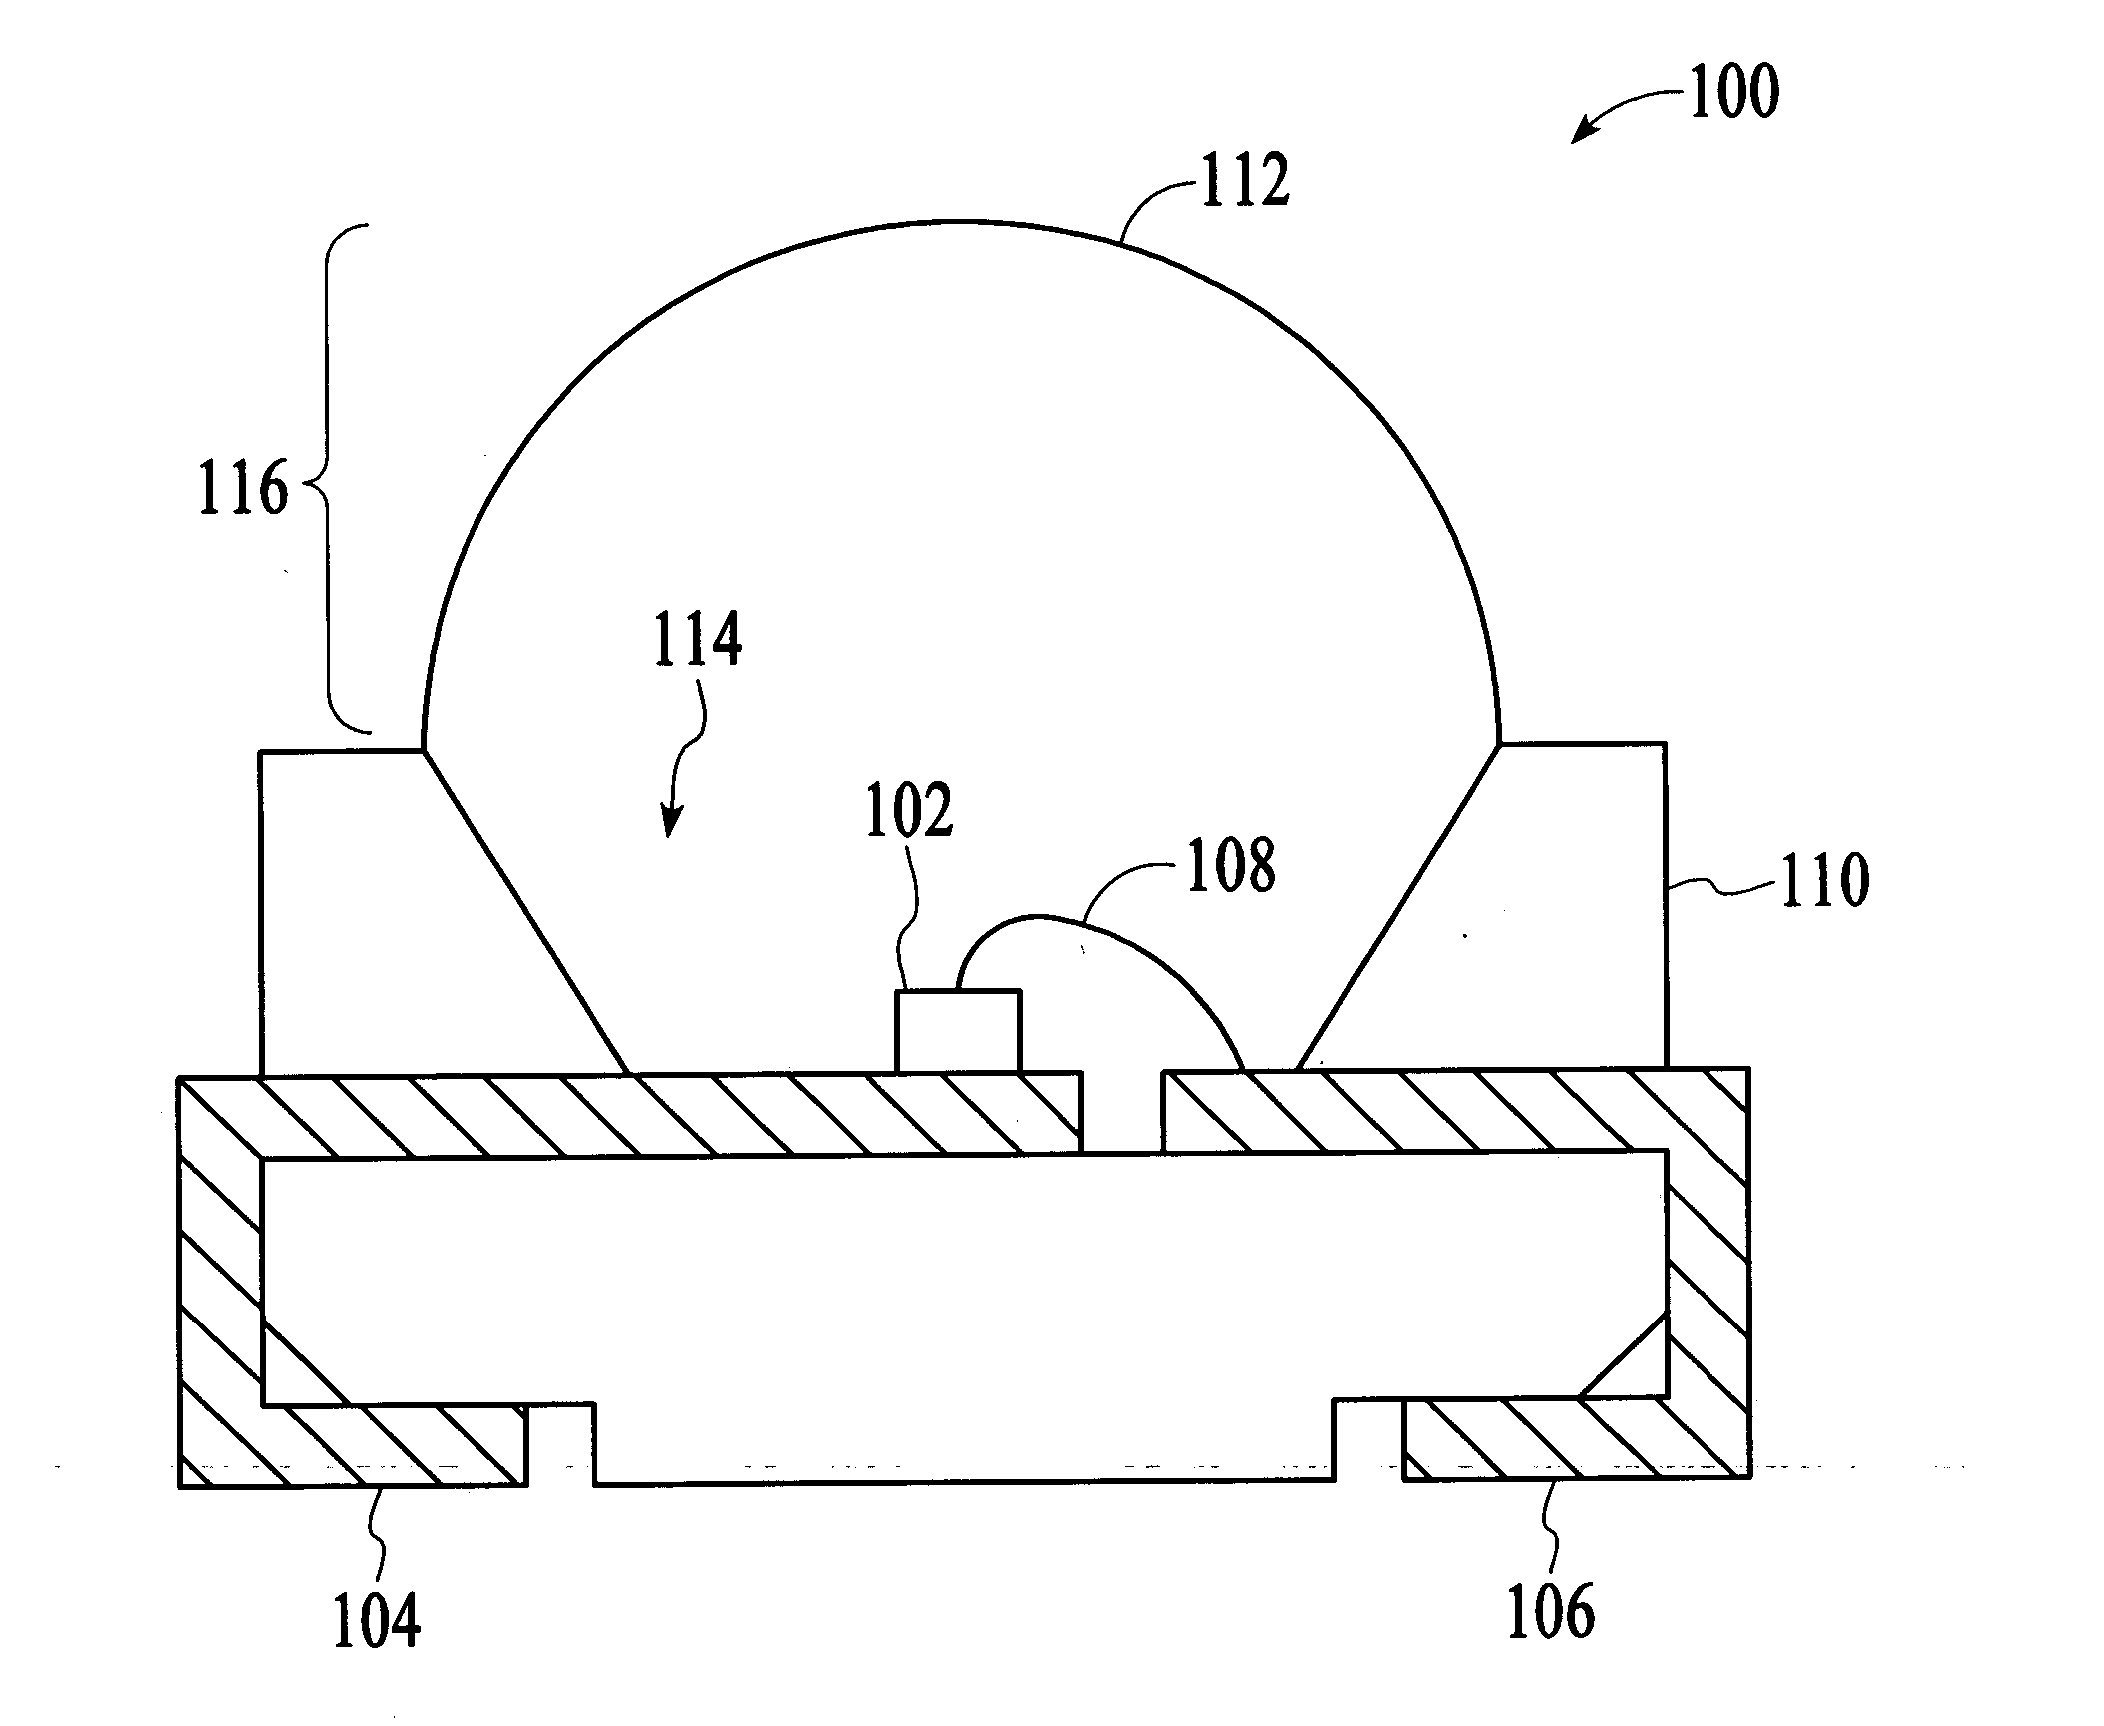 PLCC package with integrated lens and method for making the package